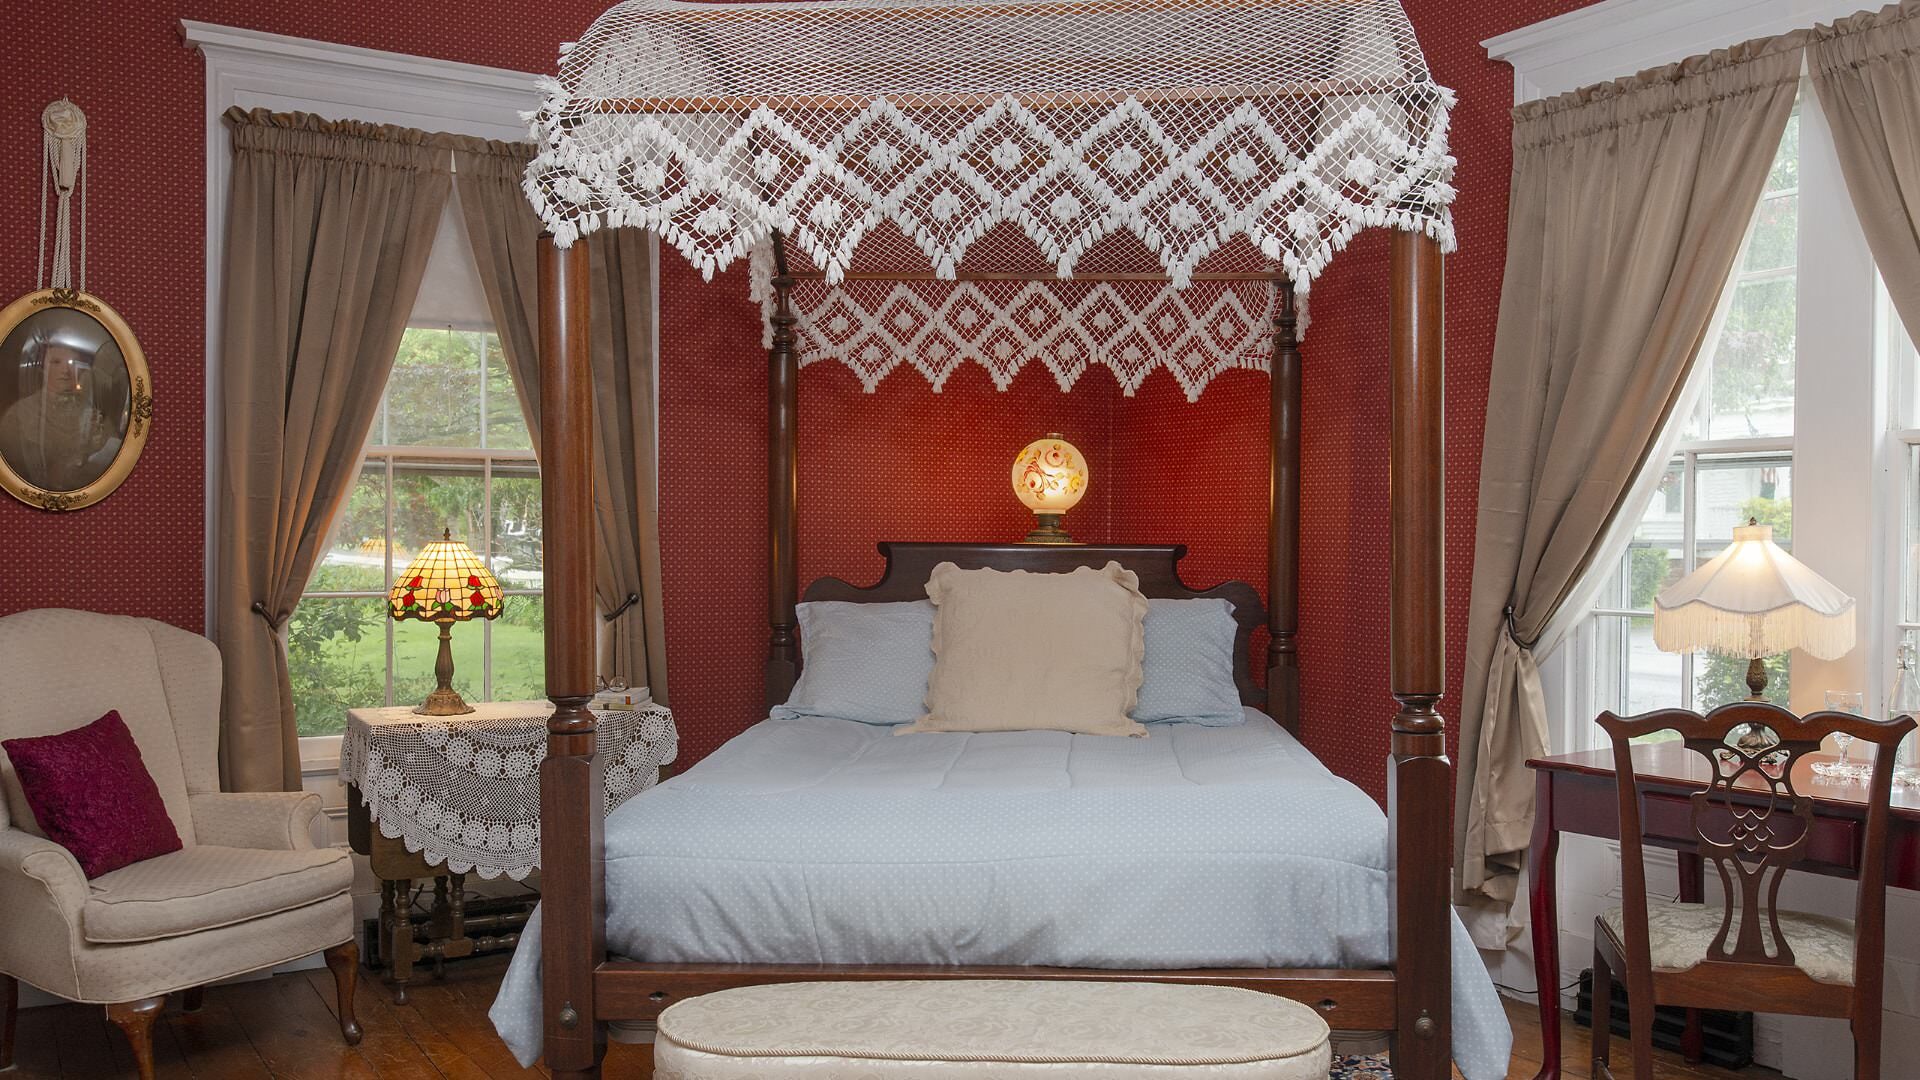 Bedroom with burgundy wallpaper, hardwood flooring, four-poster canopy dark wooden bed with light blue bedding, wooden desk, and cream upholstered antique arm chair